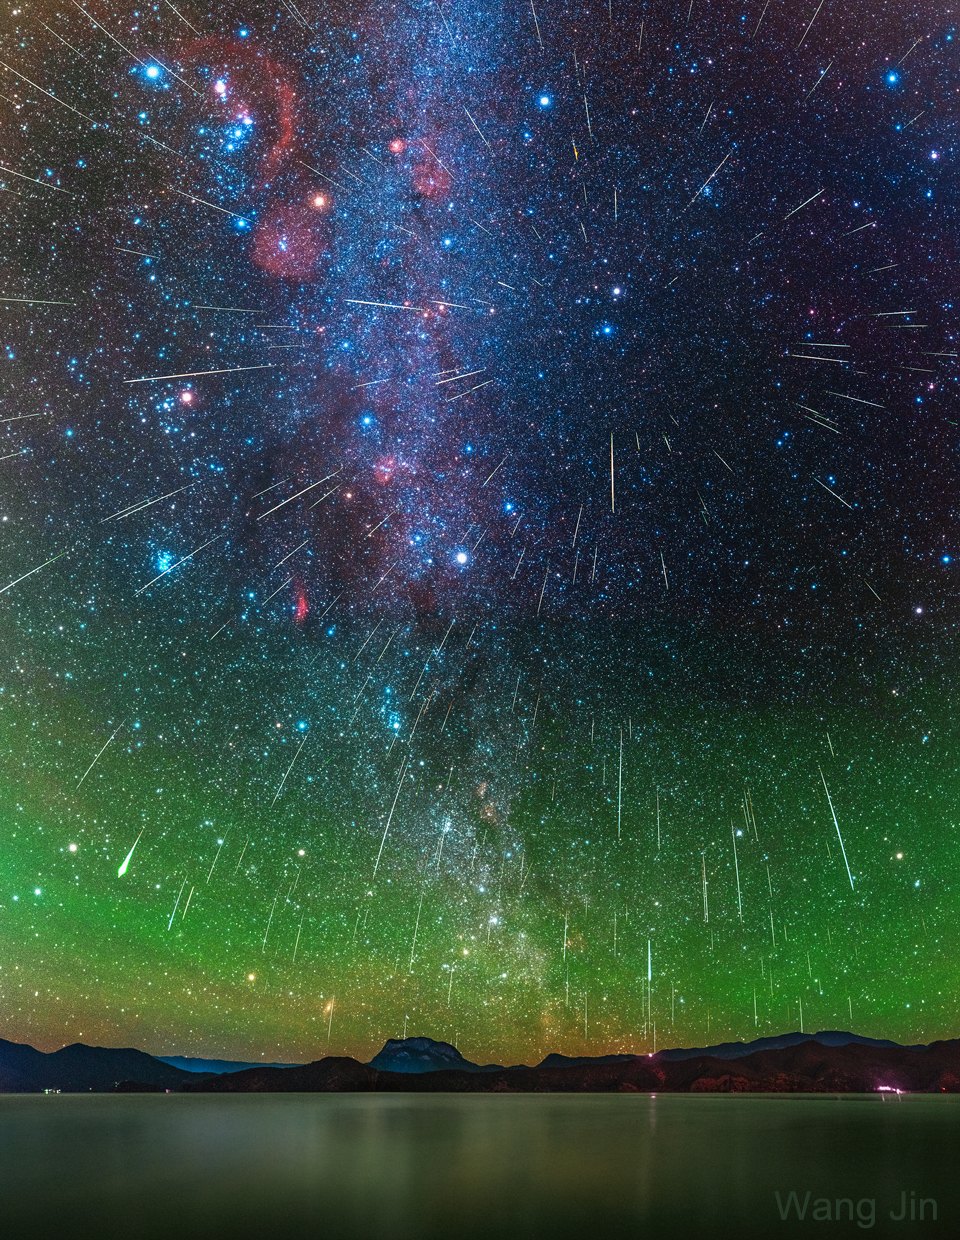 The picture shows a composite of over 200 Geminid meteors
from the 2020 Geminids meteor shower over Lake Lugu in Yunnan, China.
Please see the explanation for more detailed information.